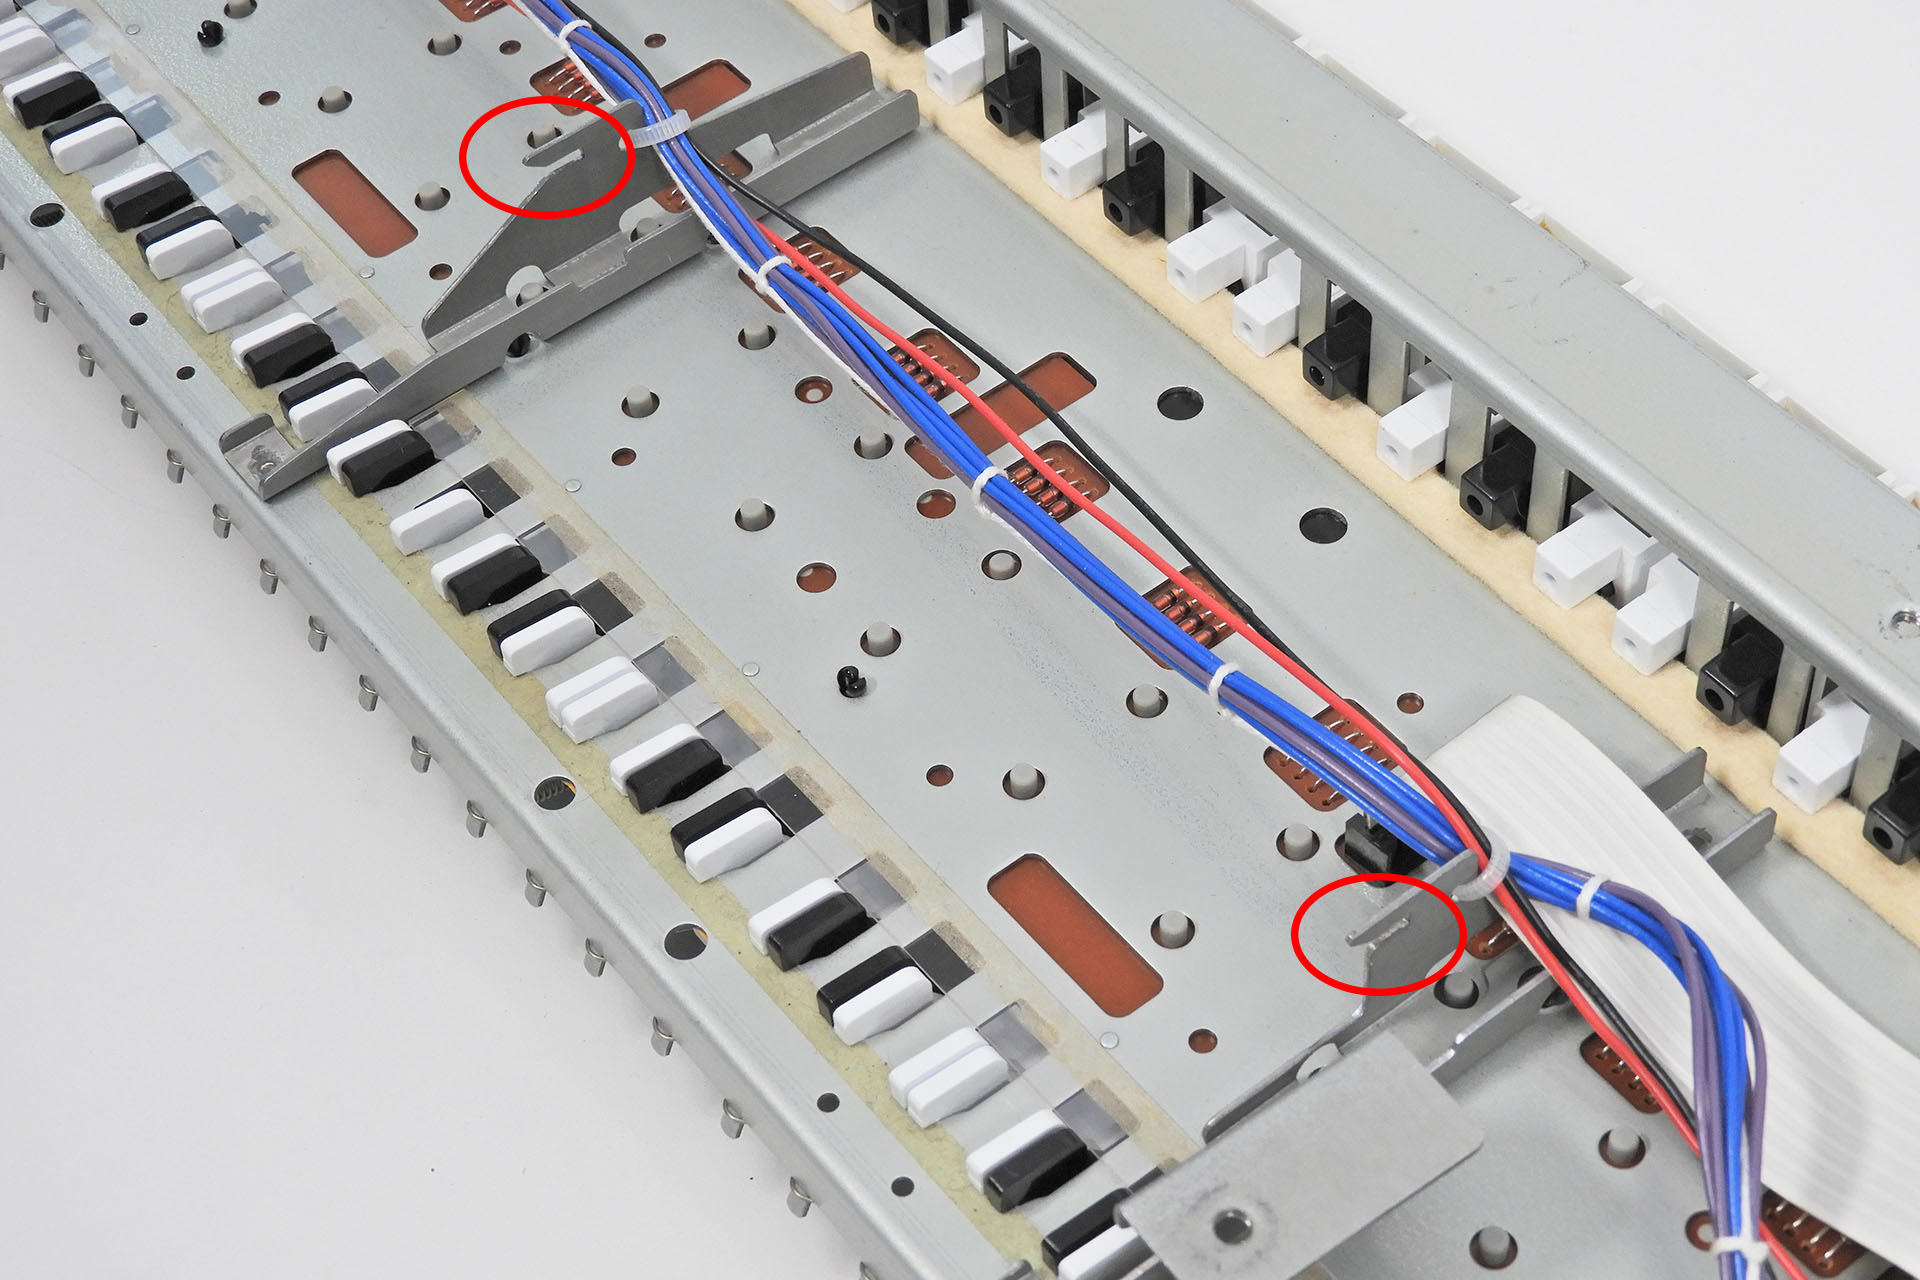 Slots in the keyboard chassis supports of the Roland Alpha Juno 2